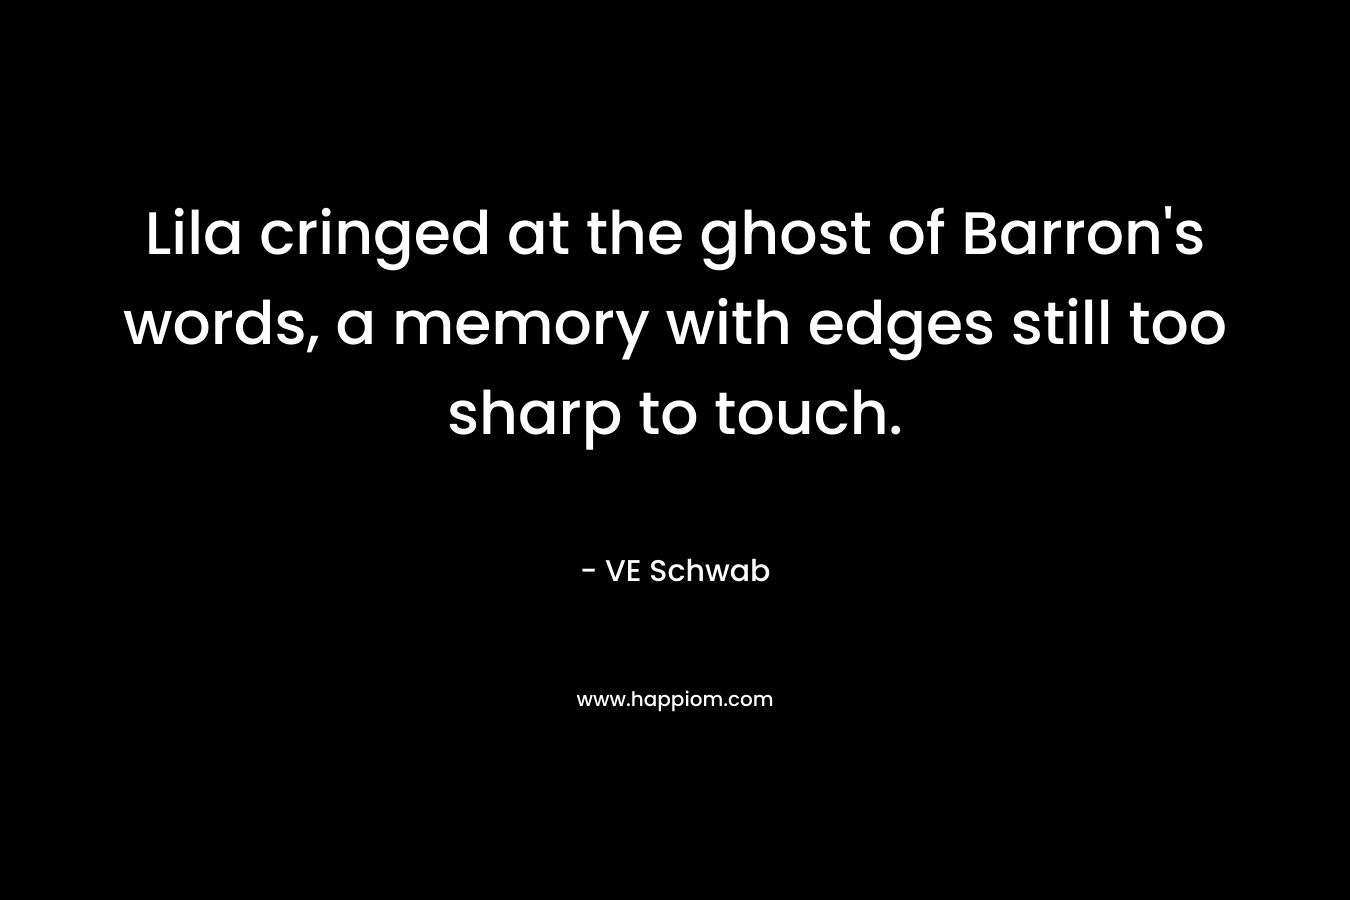 Lila cringed at the ghost of Barron’s words, a memory with edges still too sharp to touch. – VE Schwab